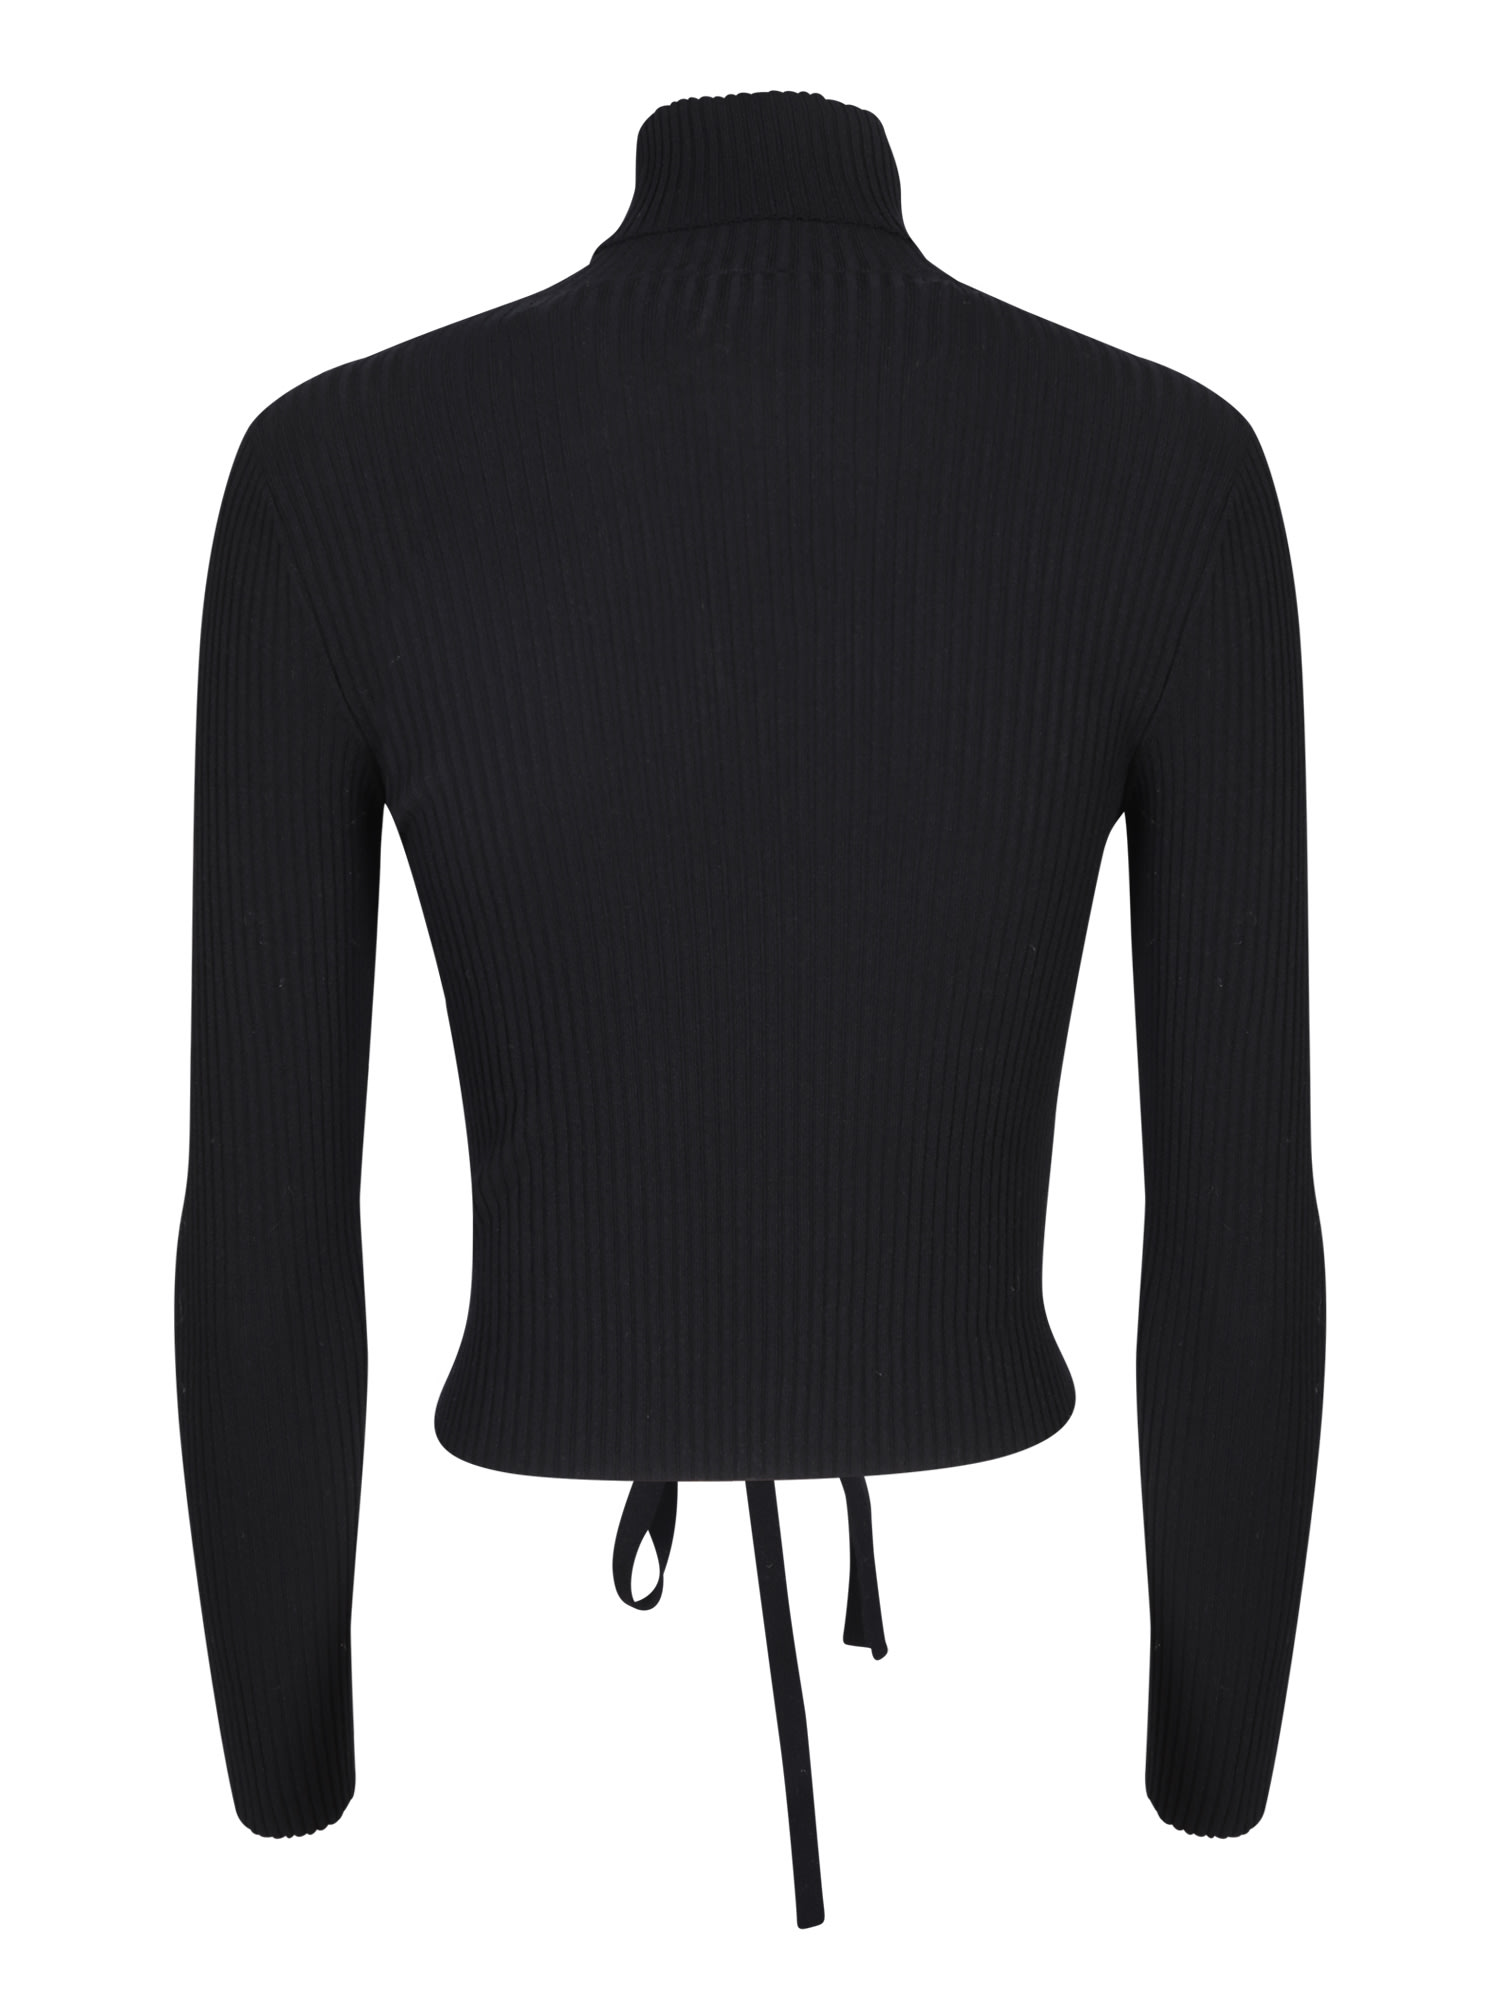 Shop Ssheena Black Lace-up Cropped Sweater